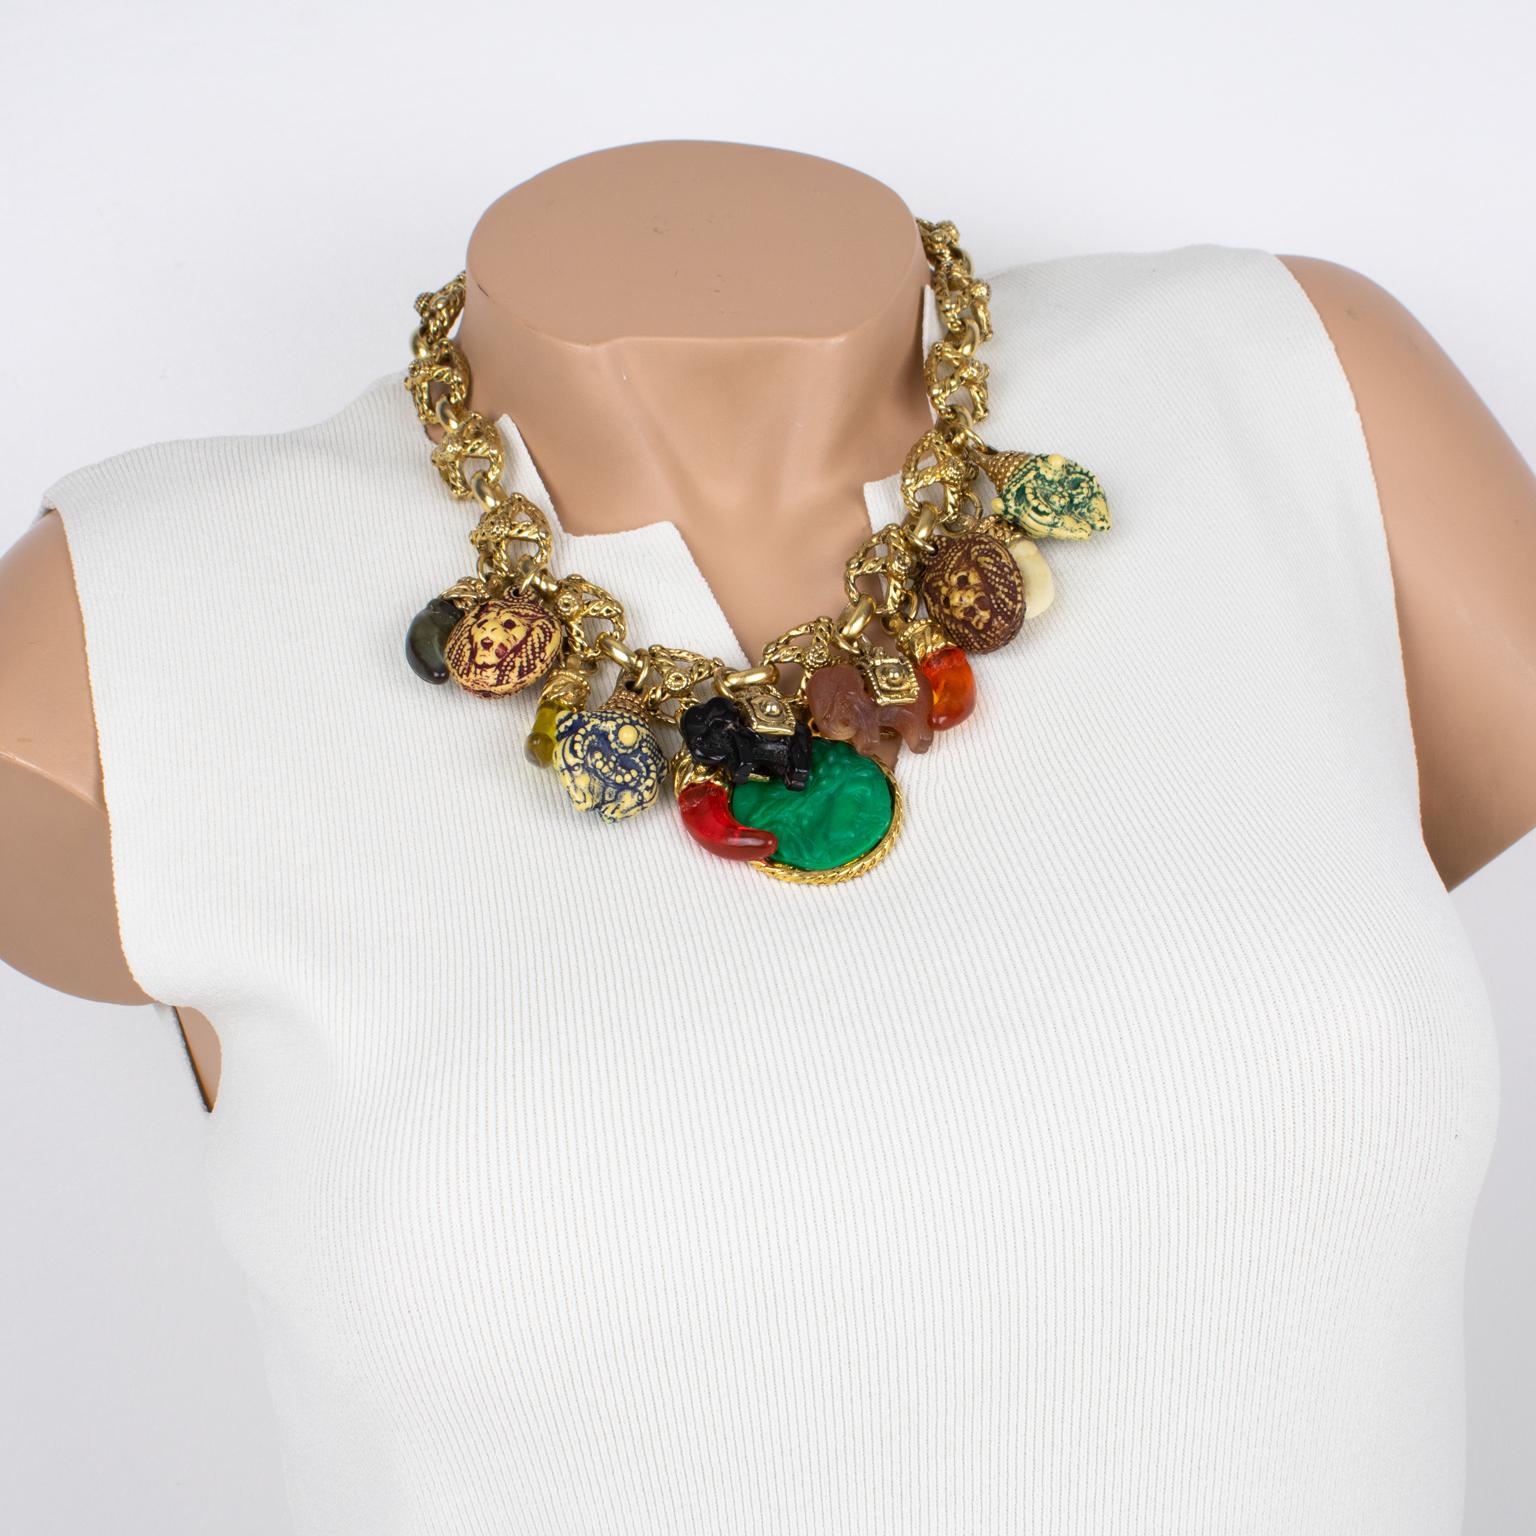 This ultra-chic Kalinger Paris choker necklace boasts a typical 1980s design with a worked gilded metal chain ornated with multicolor resin charms. The dangling charms with elephants, lion's heads, cameo, ram heads, and large faux claws contributed